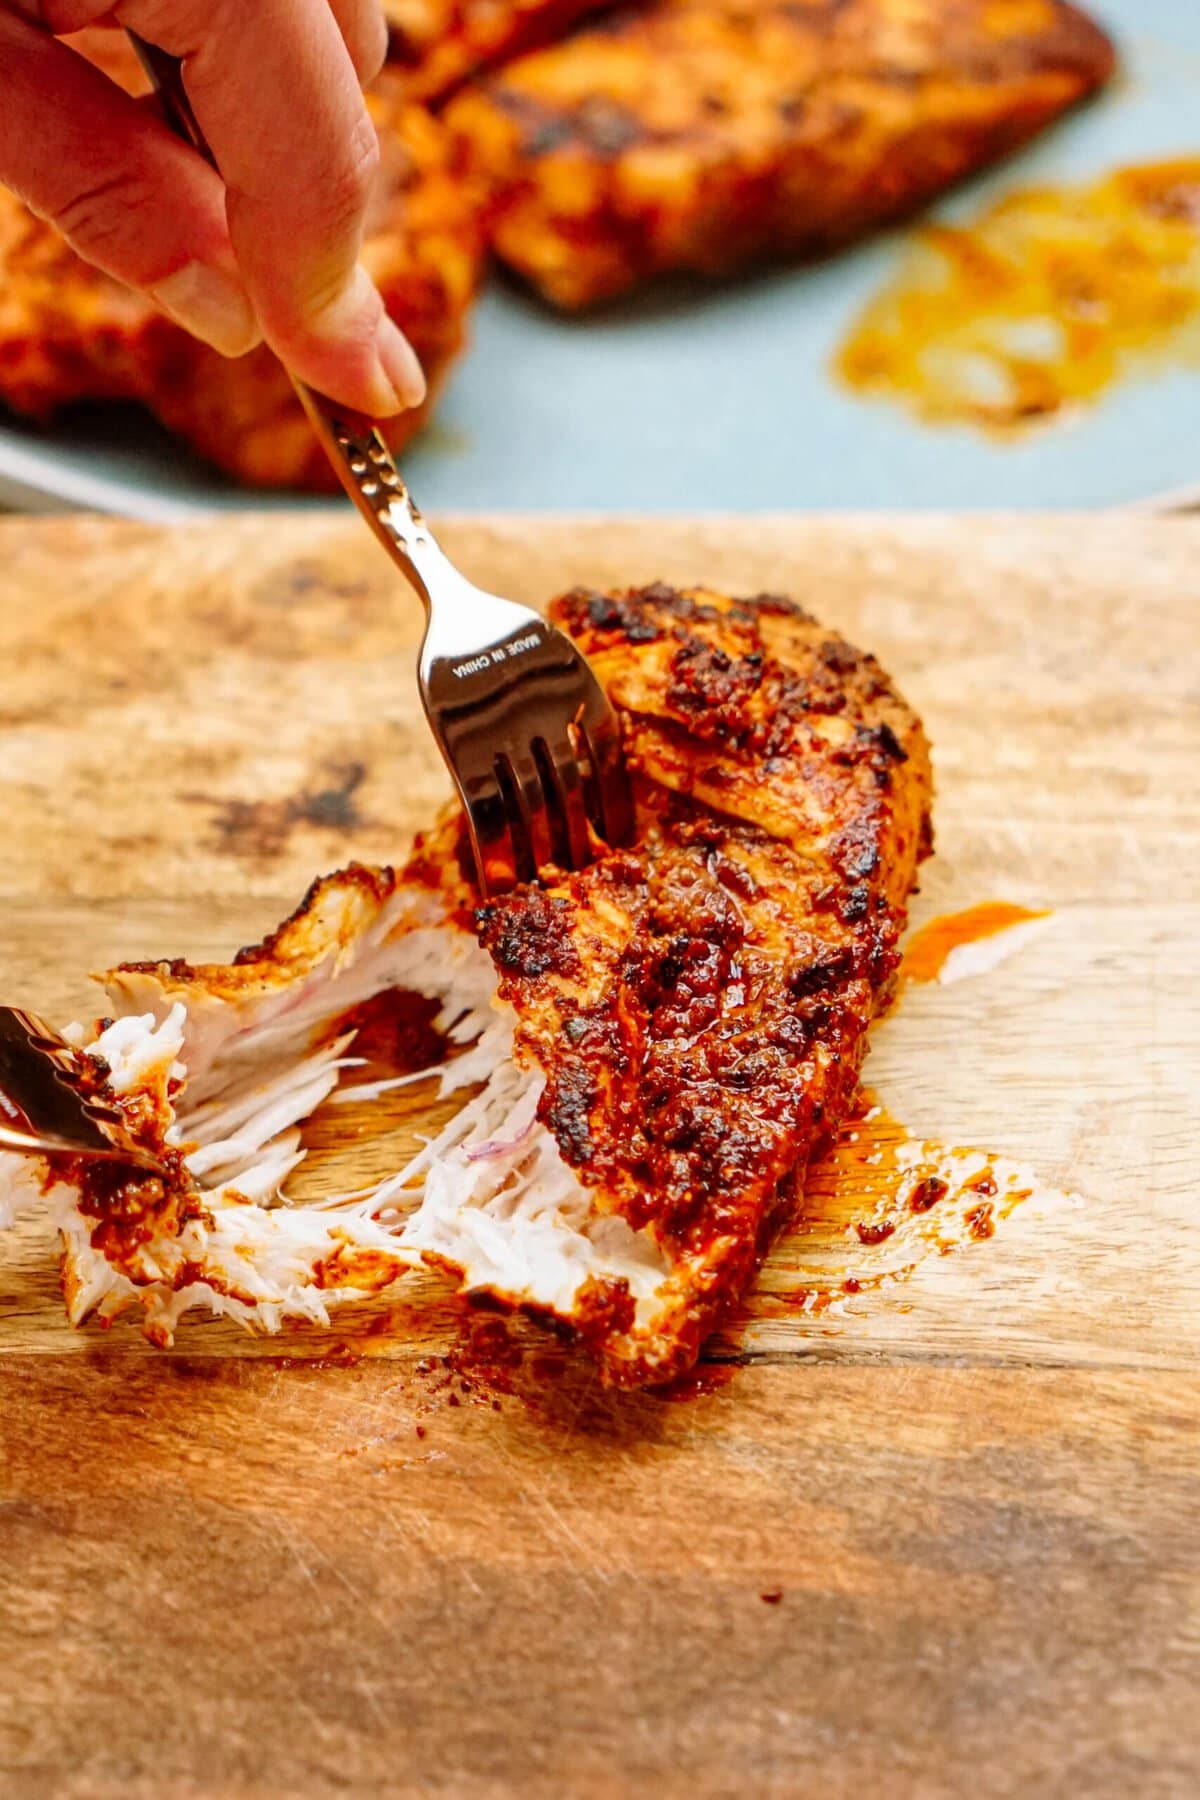 Close-up of a fork pulling apart a piece of seasoned, grilled chicken breast on a wooden cutting board. Another piece of meat is blurred in the background.